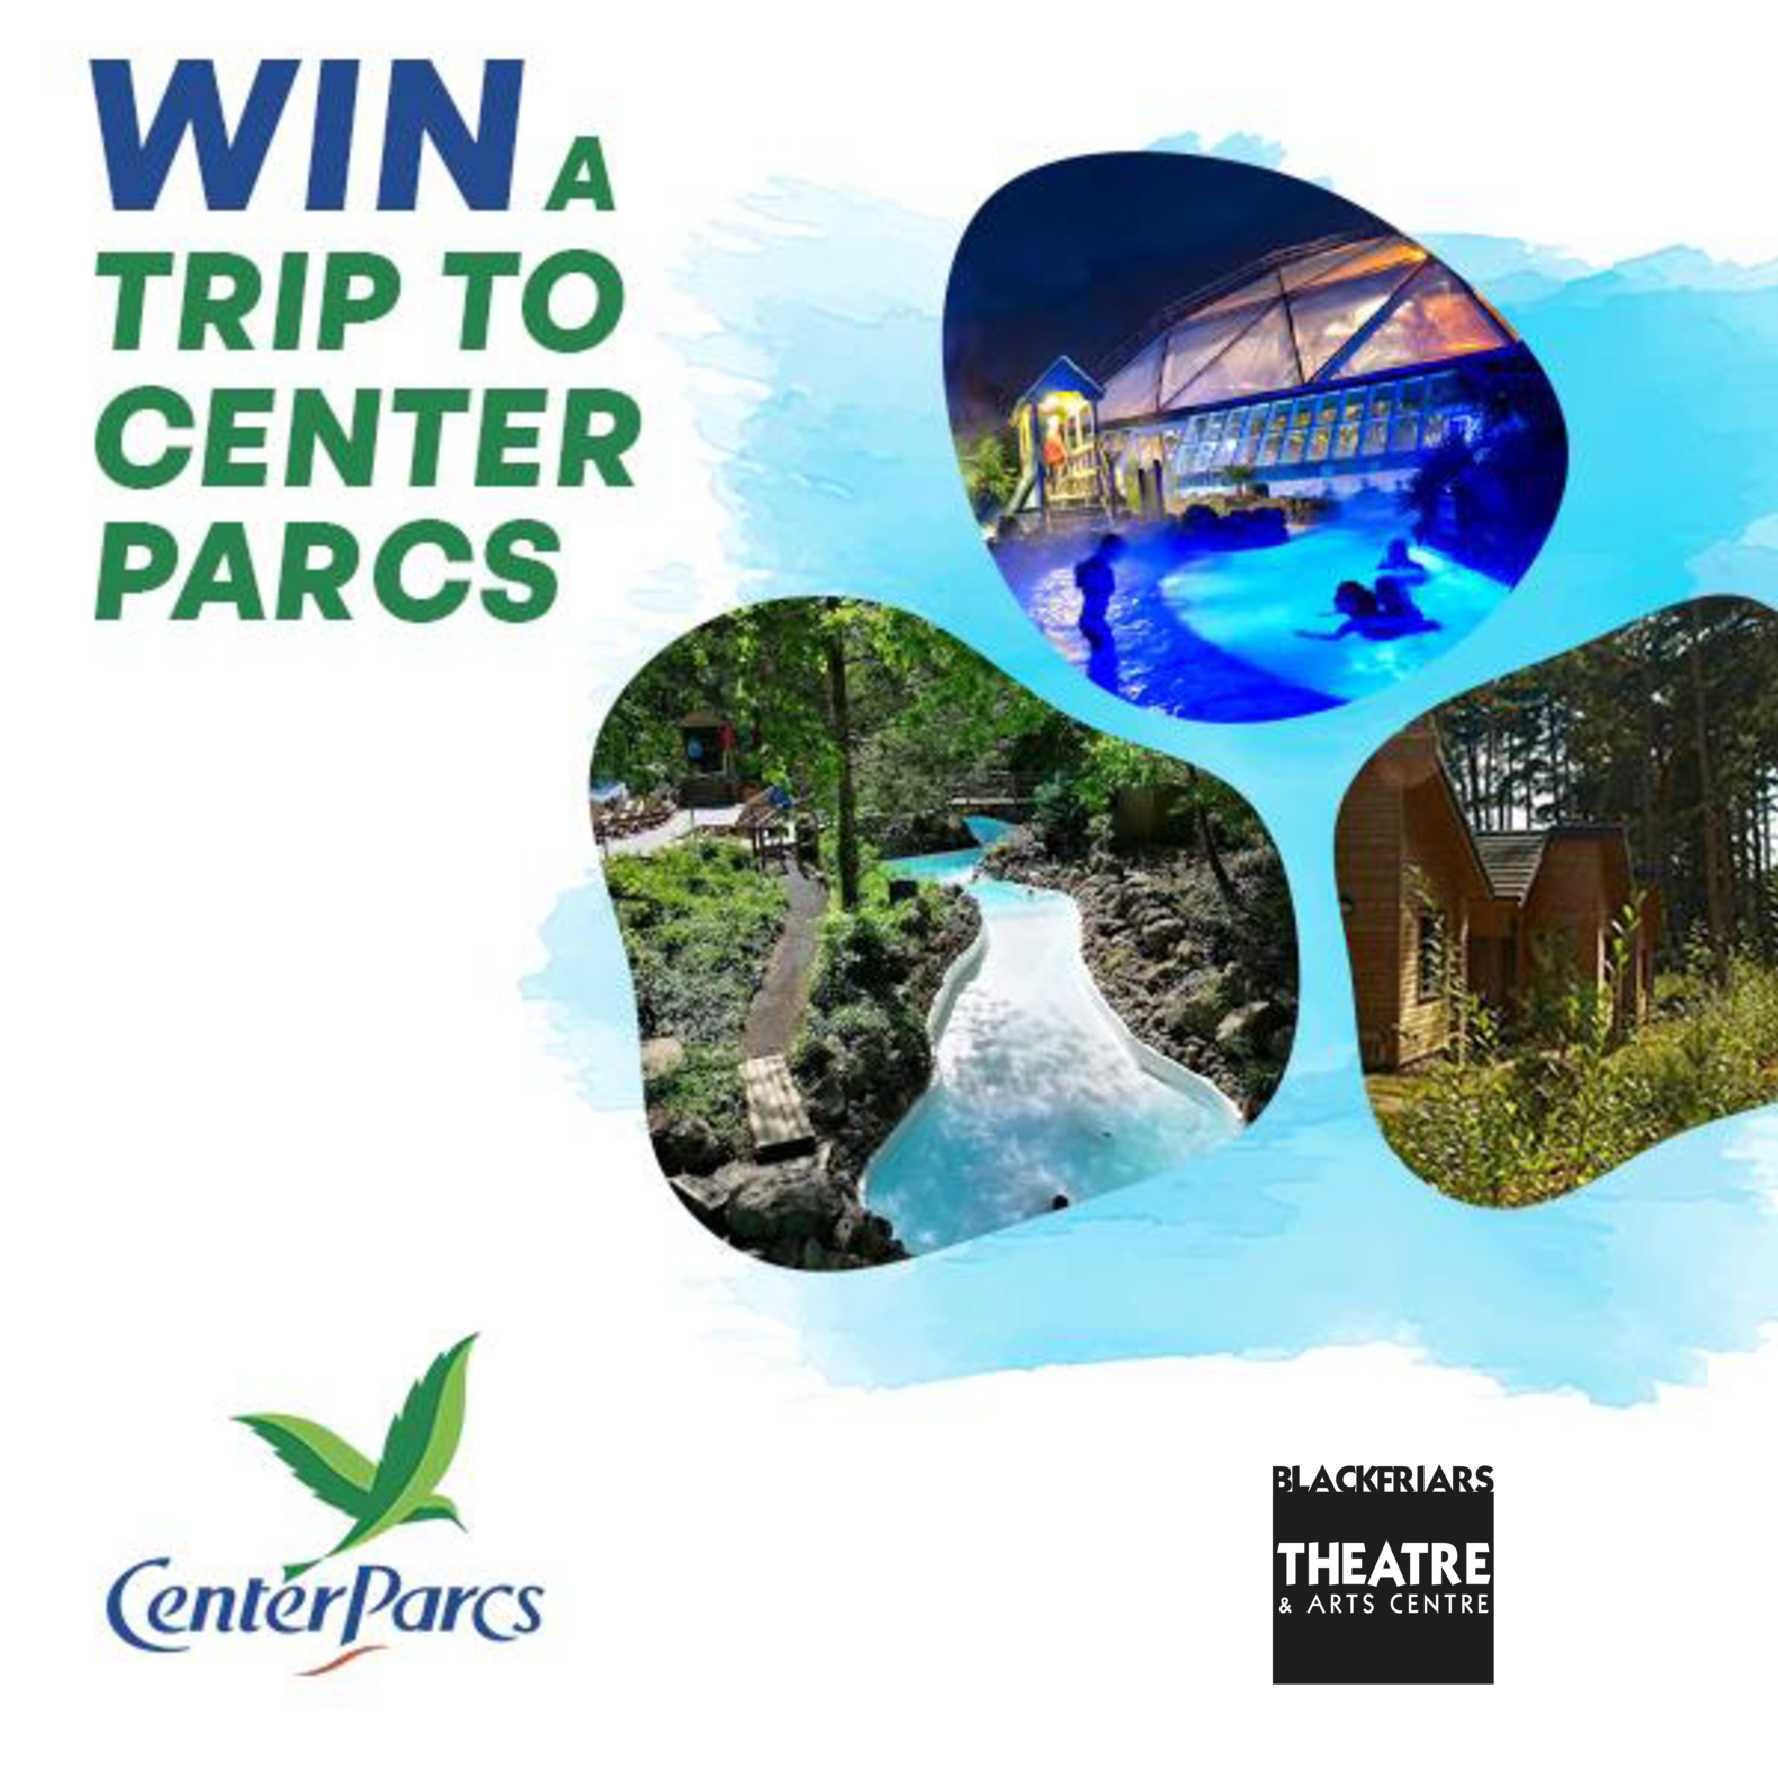 Win a trip to Center Parcs with Community Lottery